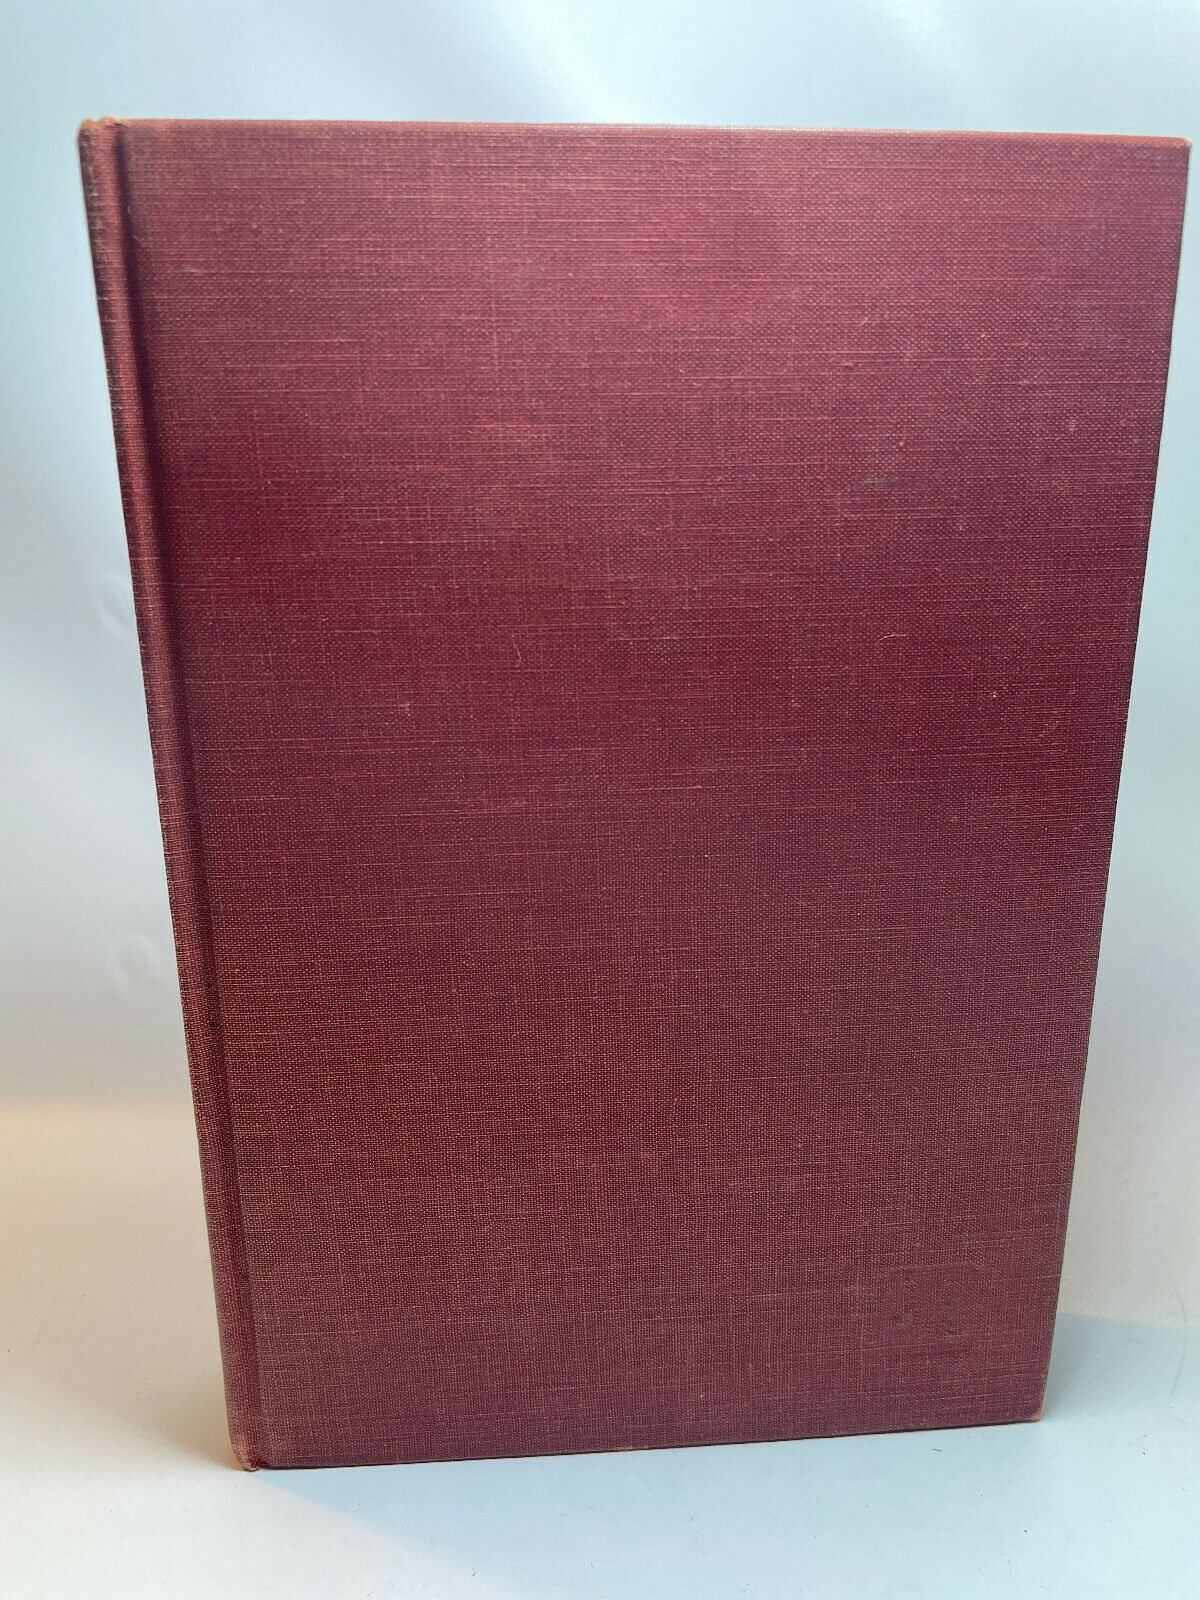 Dickens His Character Comedy And Career by Hesketh Pearso 1949 1st Edition (A2)